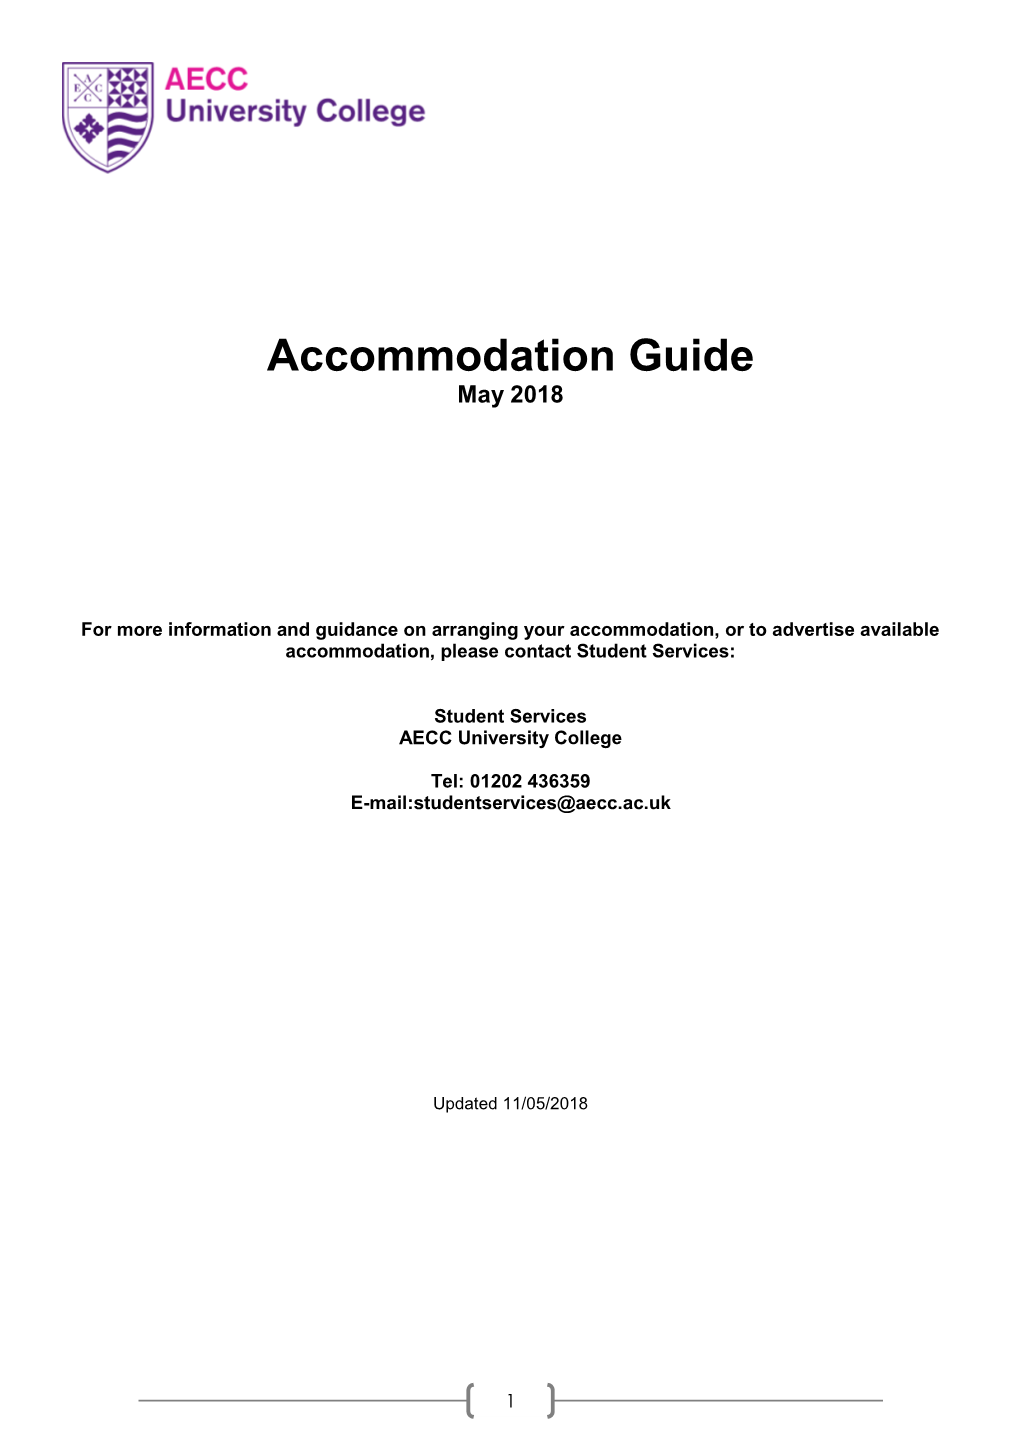 Accommodation Guide May 2018